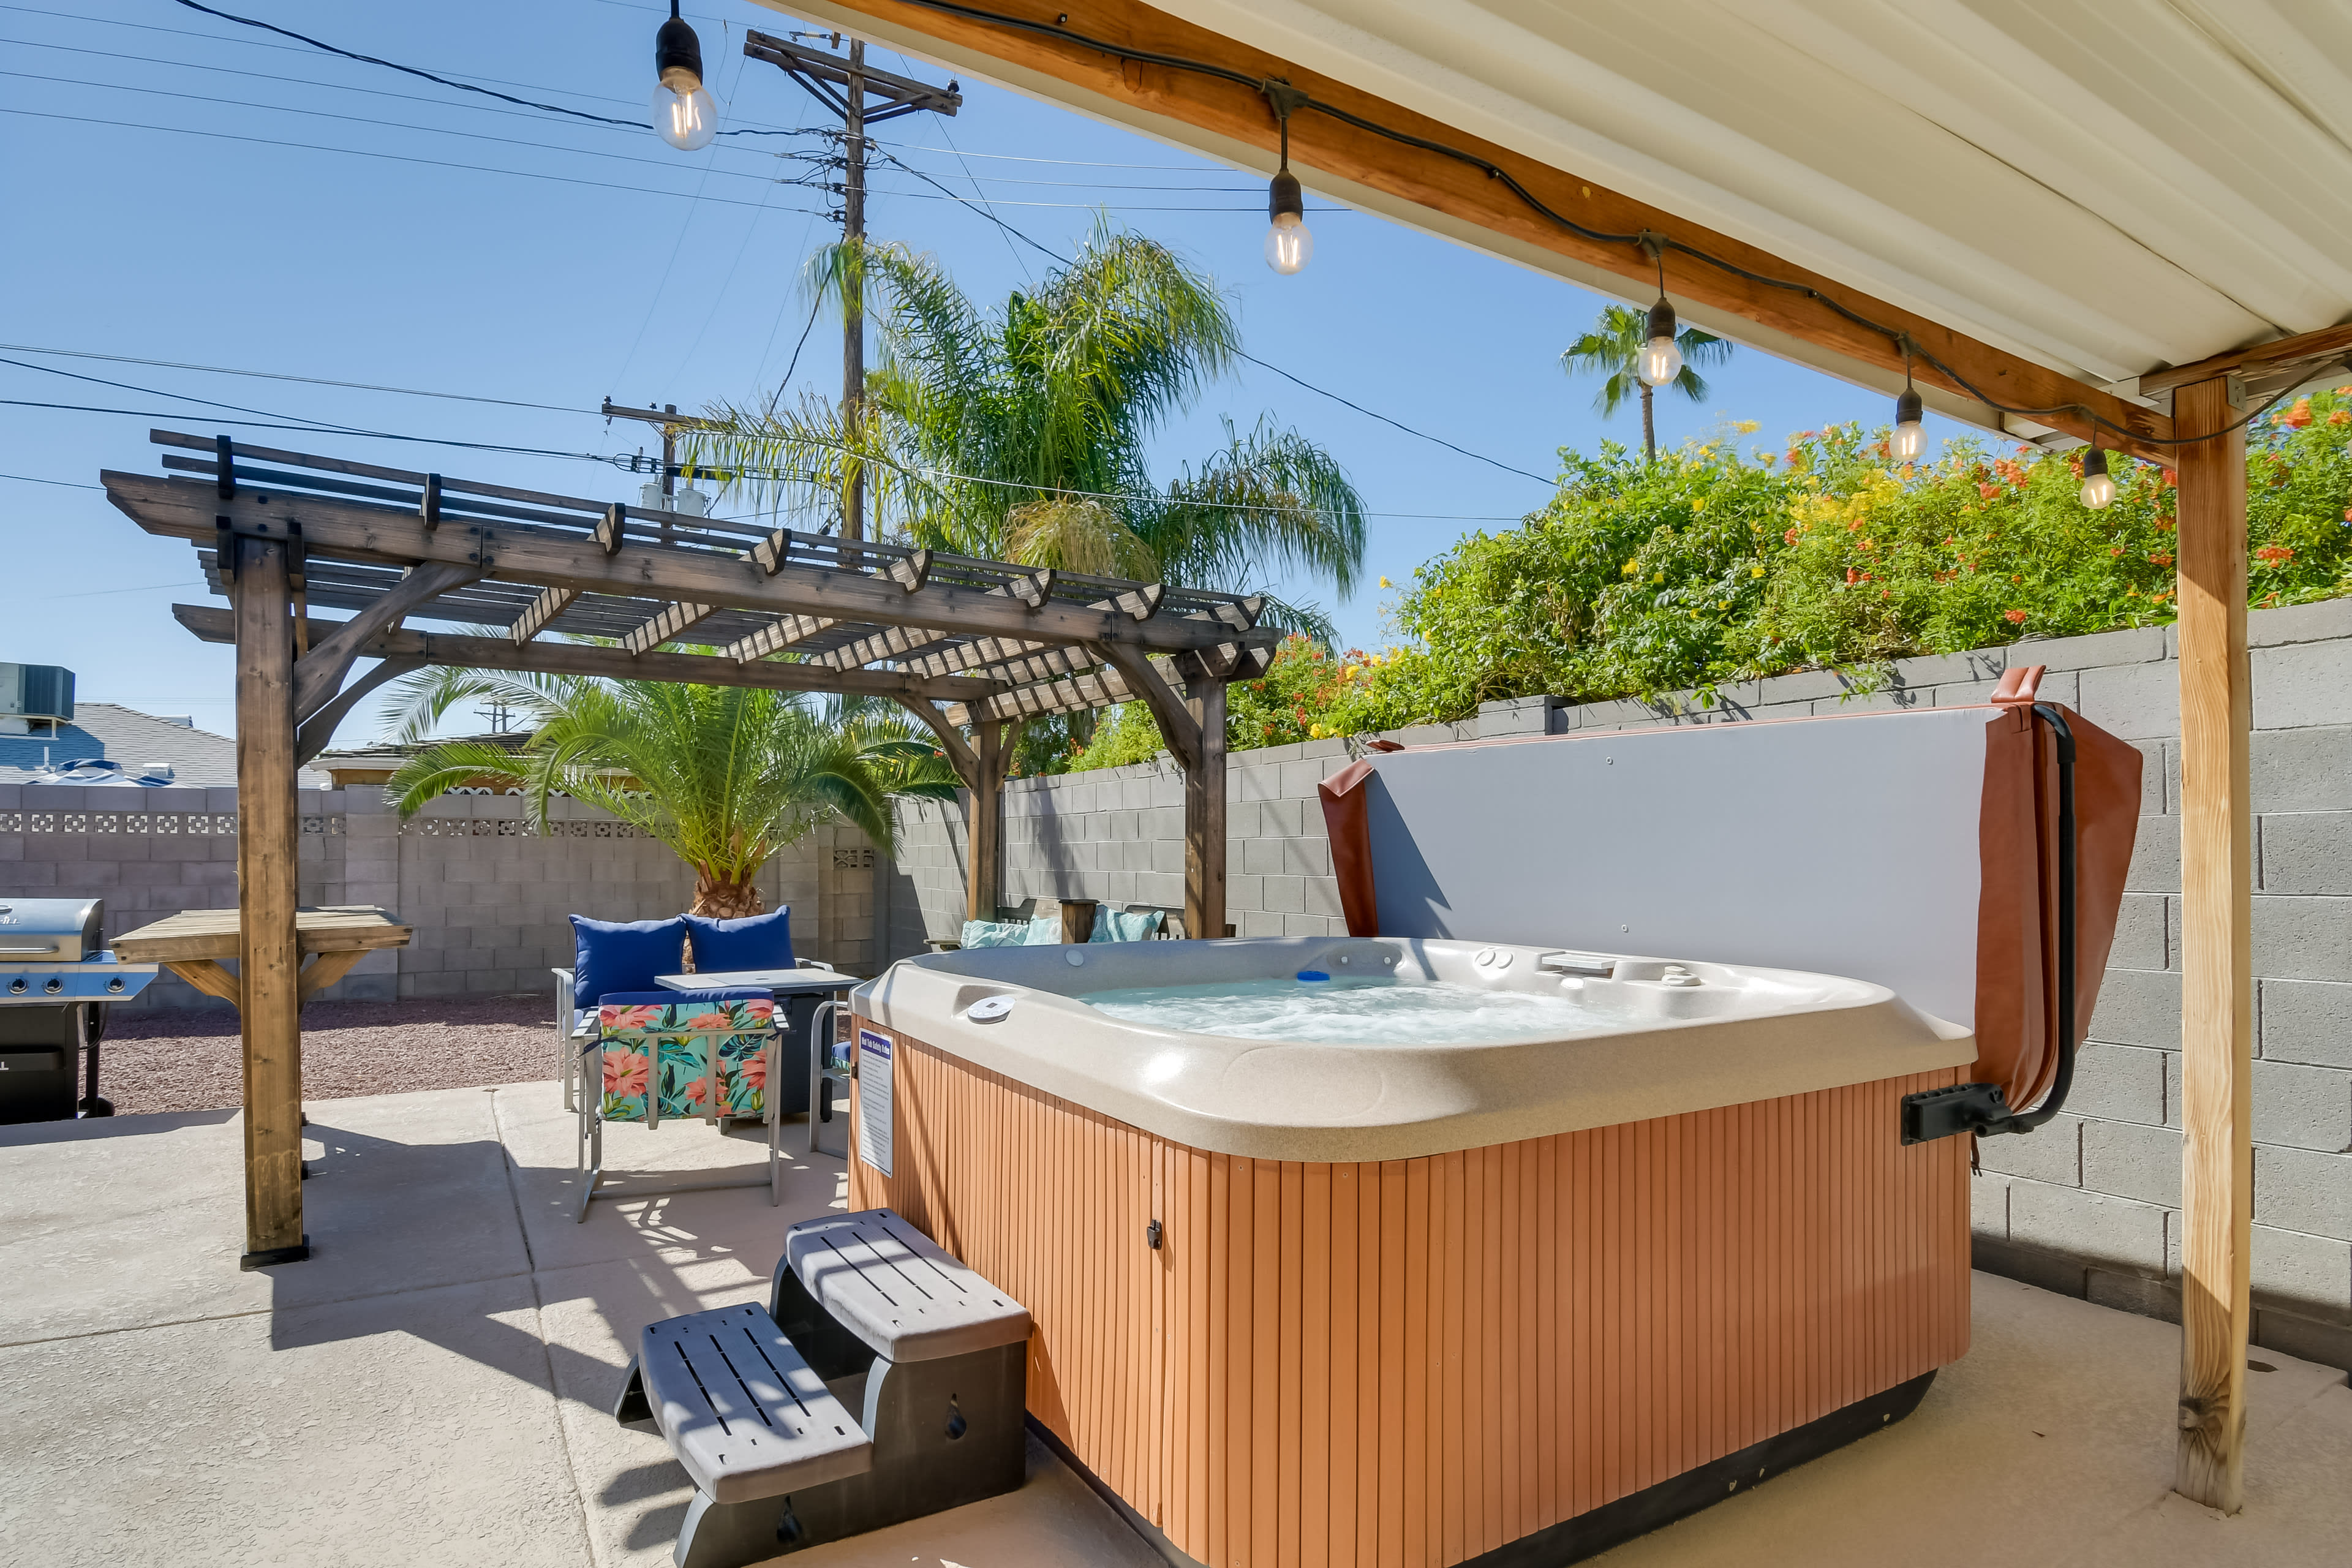 Private Hot Tub | Gas Fire Pit | Gas Grill | Outdoor Dining Area